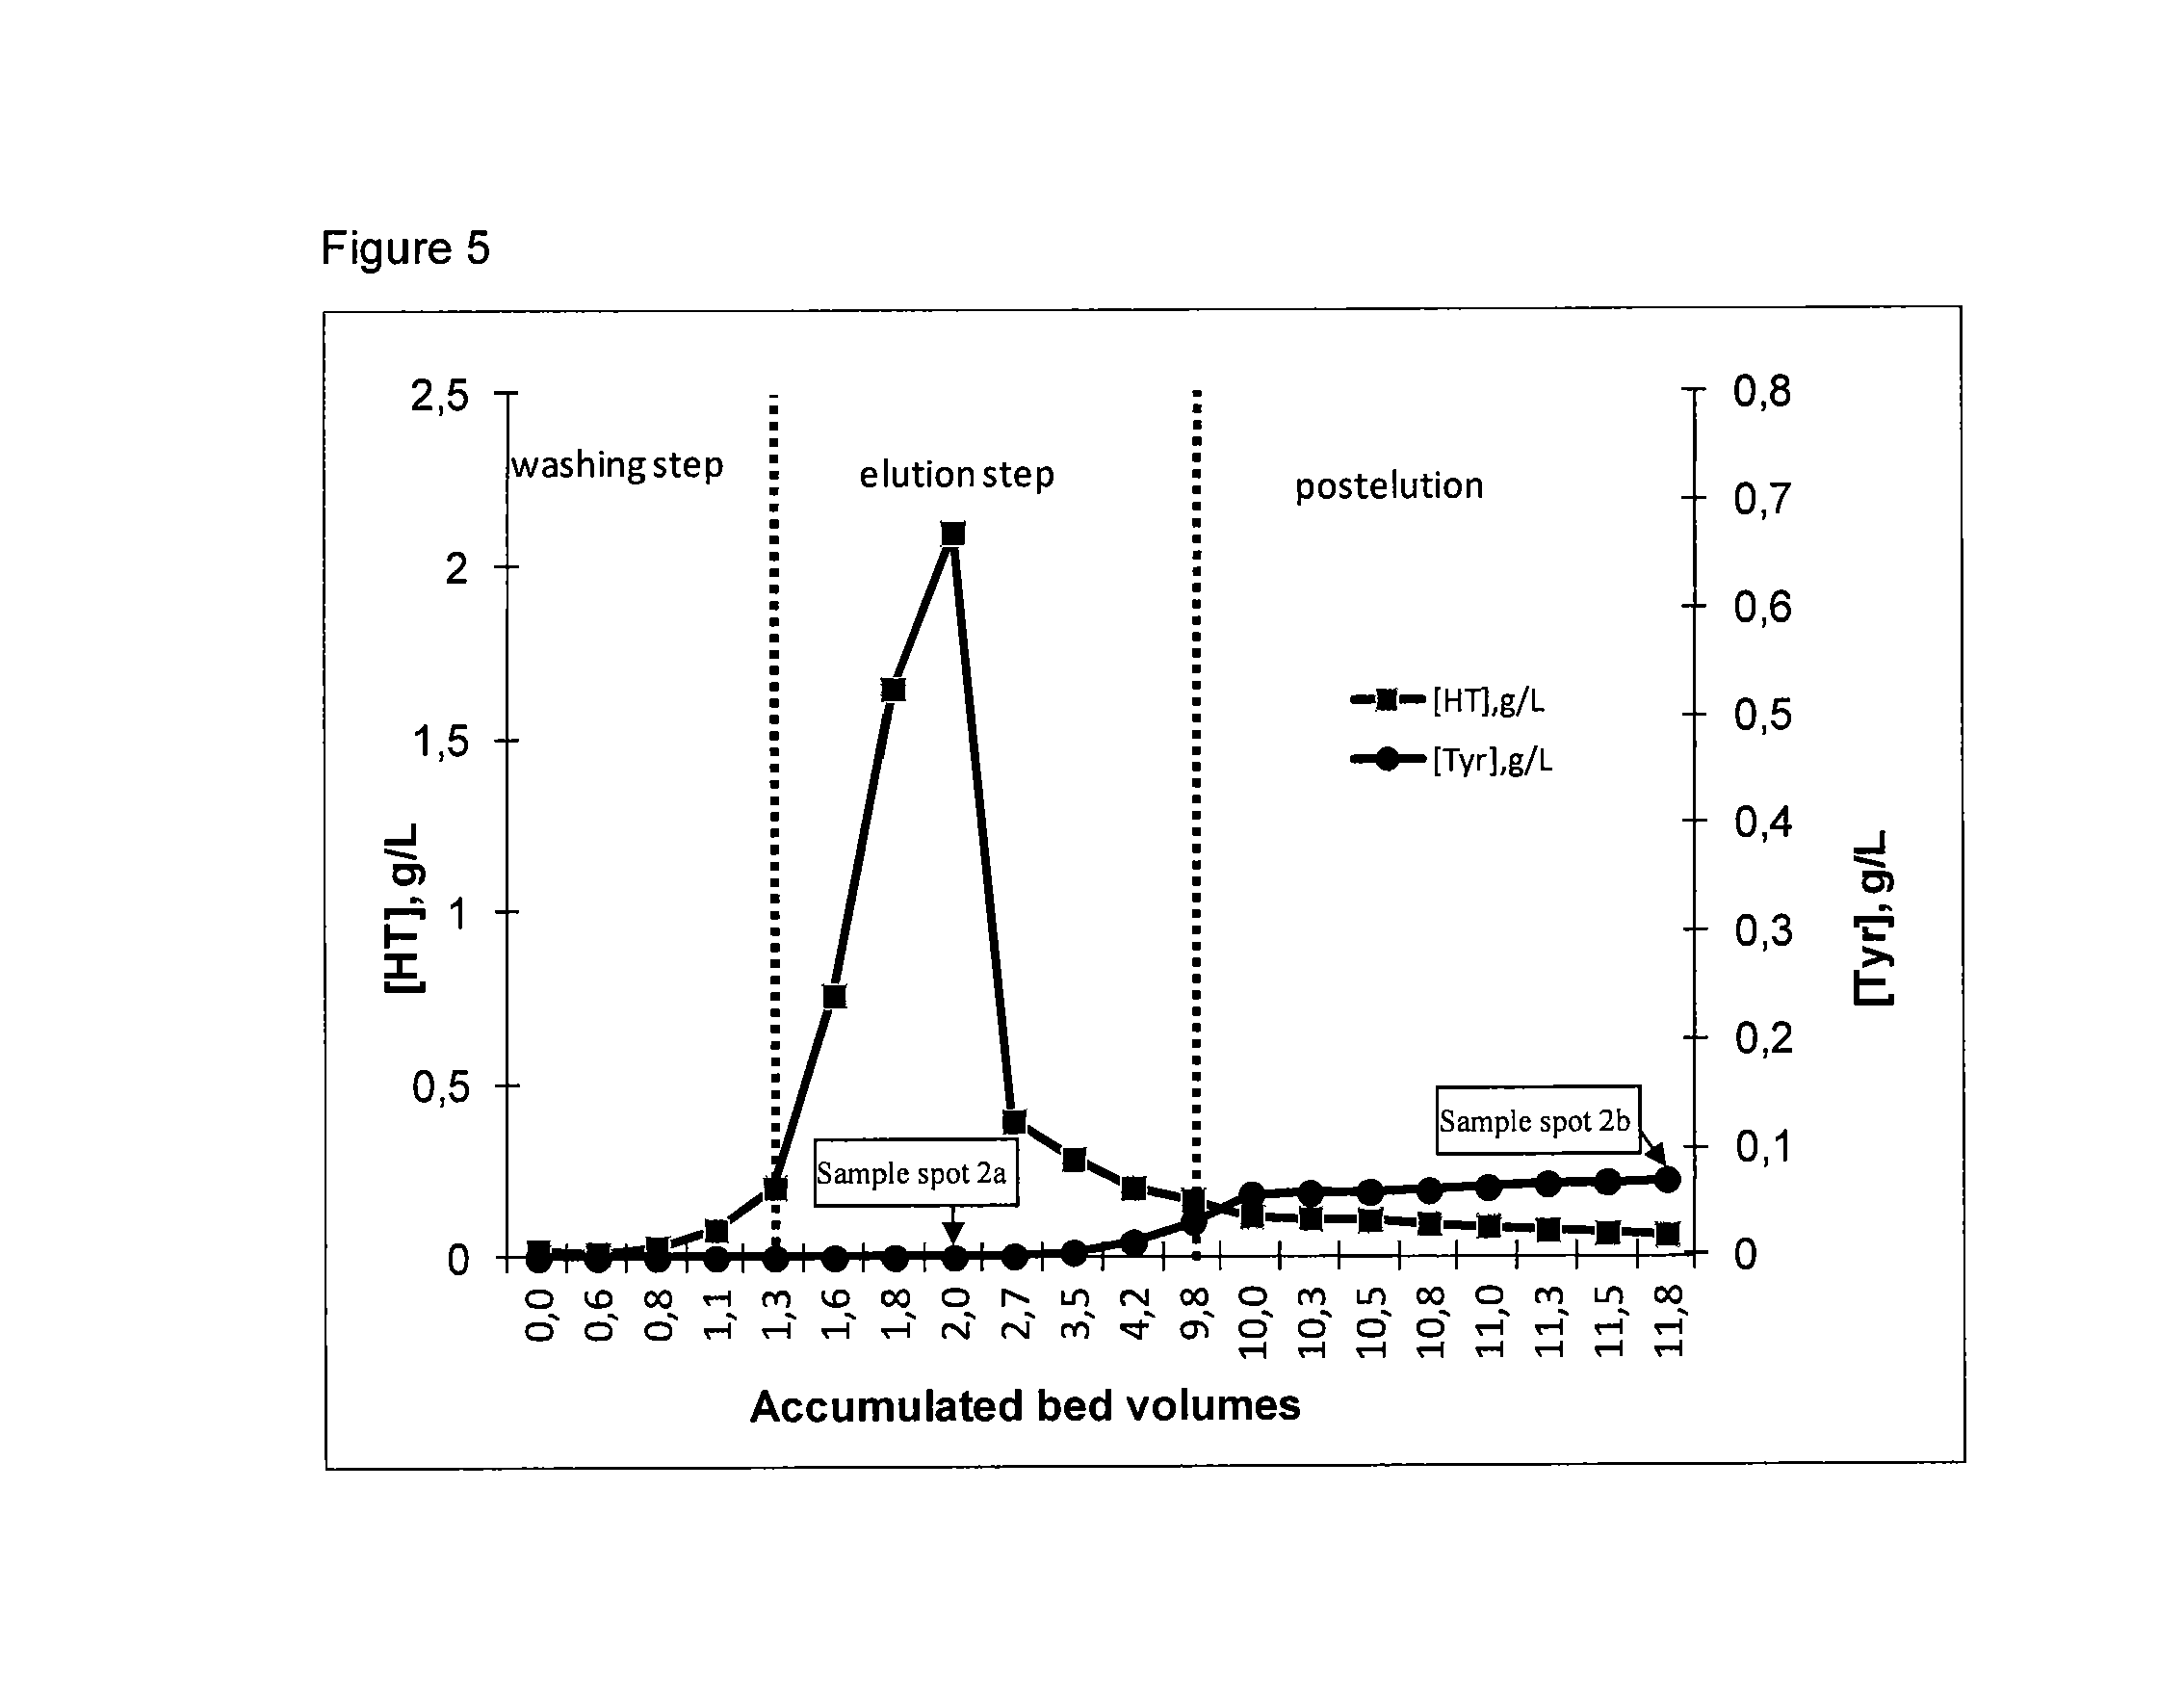 Hydroxytrosol containing extract obtained from olives and solids containing residues of olive oil extraction